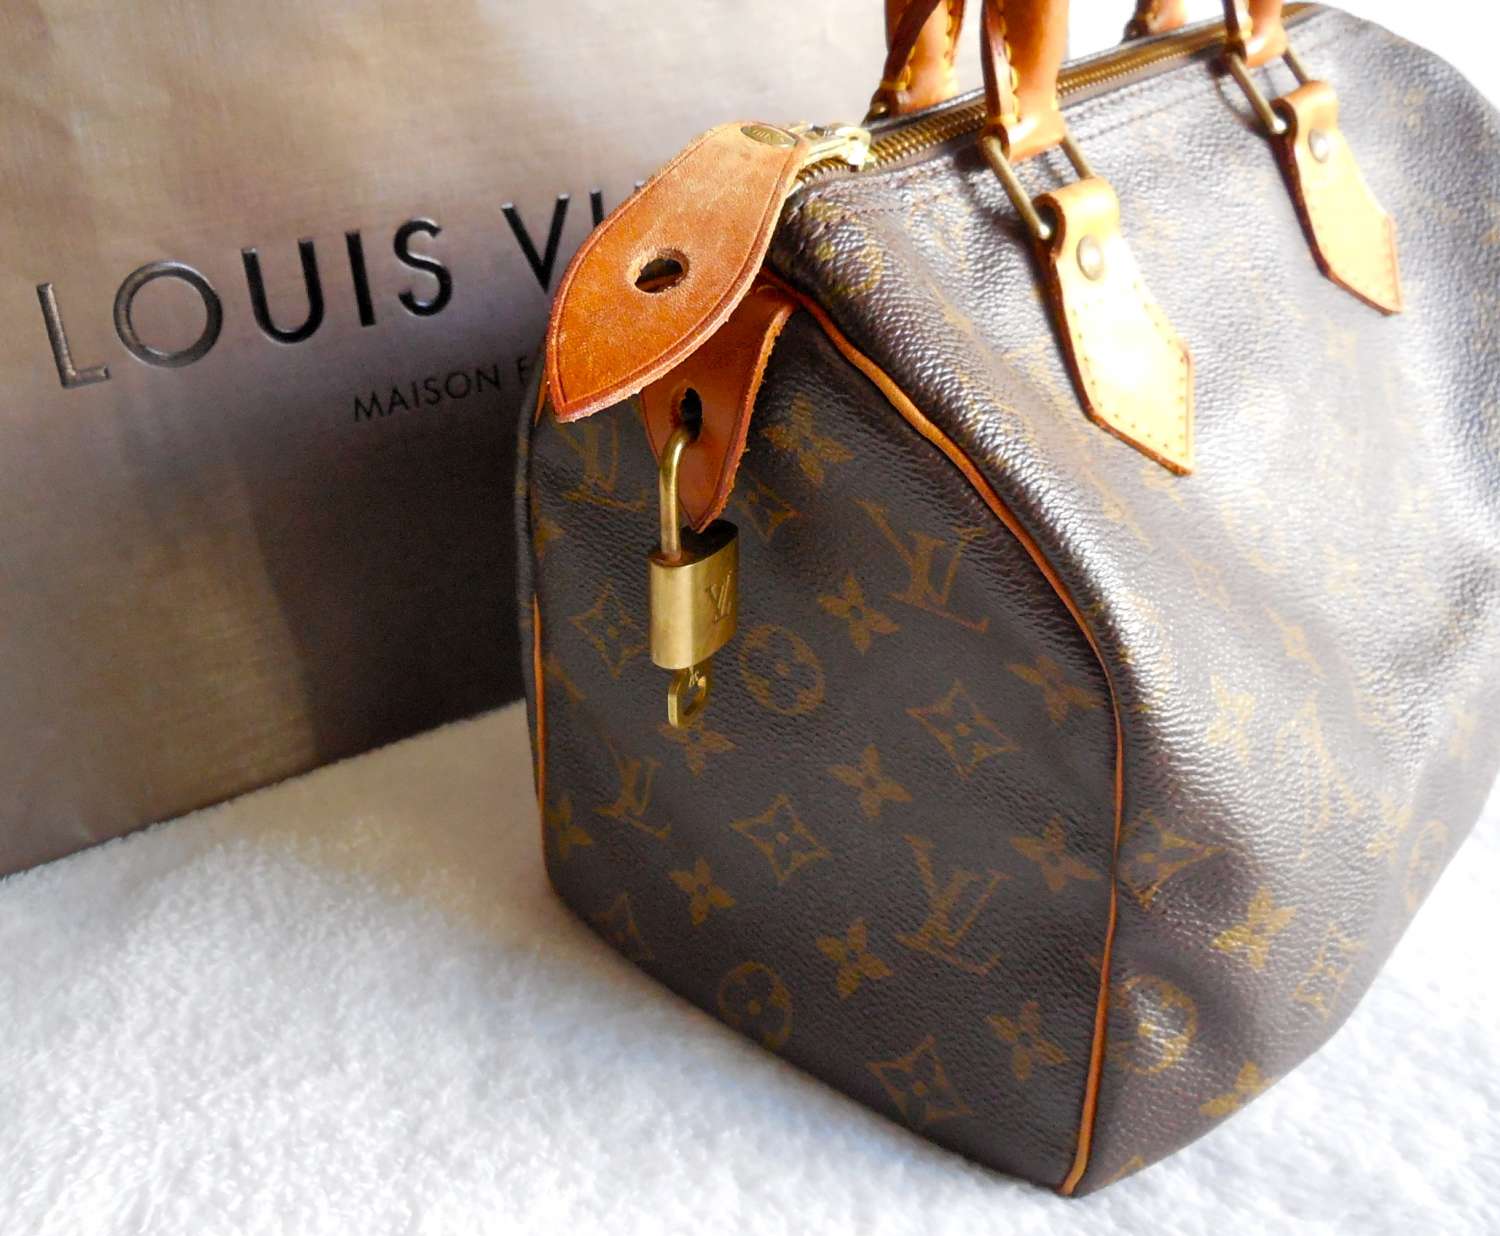 Are Louis Vuitton Bags A Good Investment Company | The Art of Mike Mignola